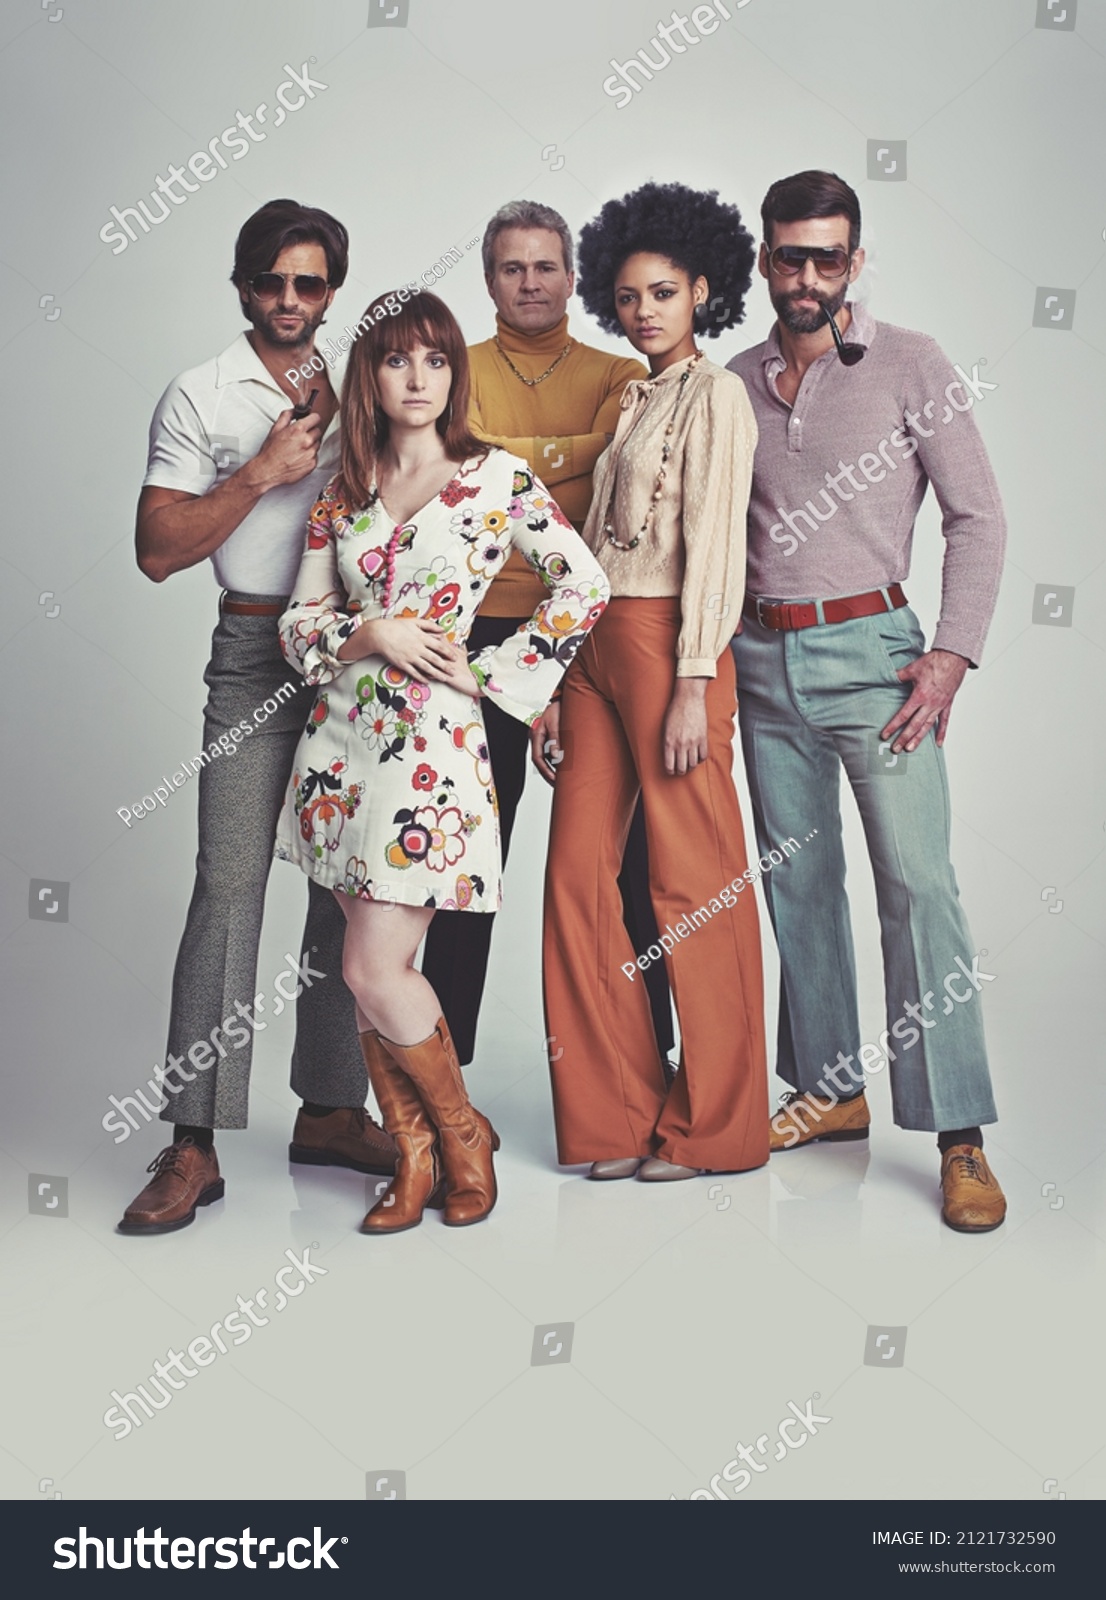 Nothing like some 70s style. A studio shot of a group of people standing together while clad in retro 70s wear. #2121732590